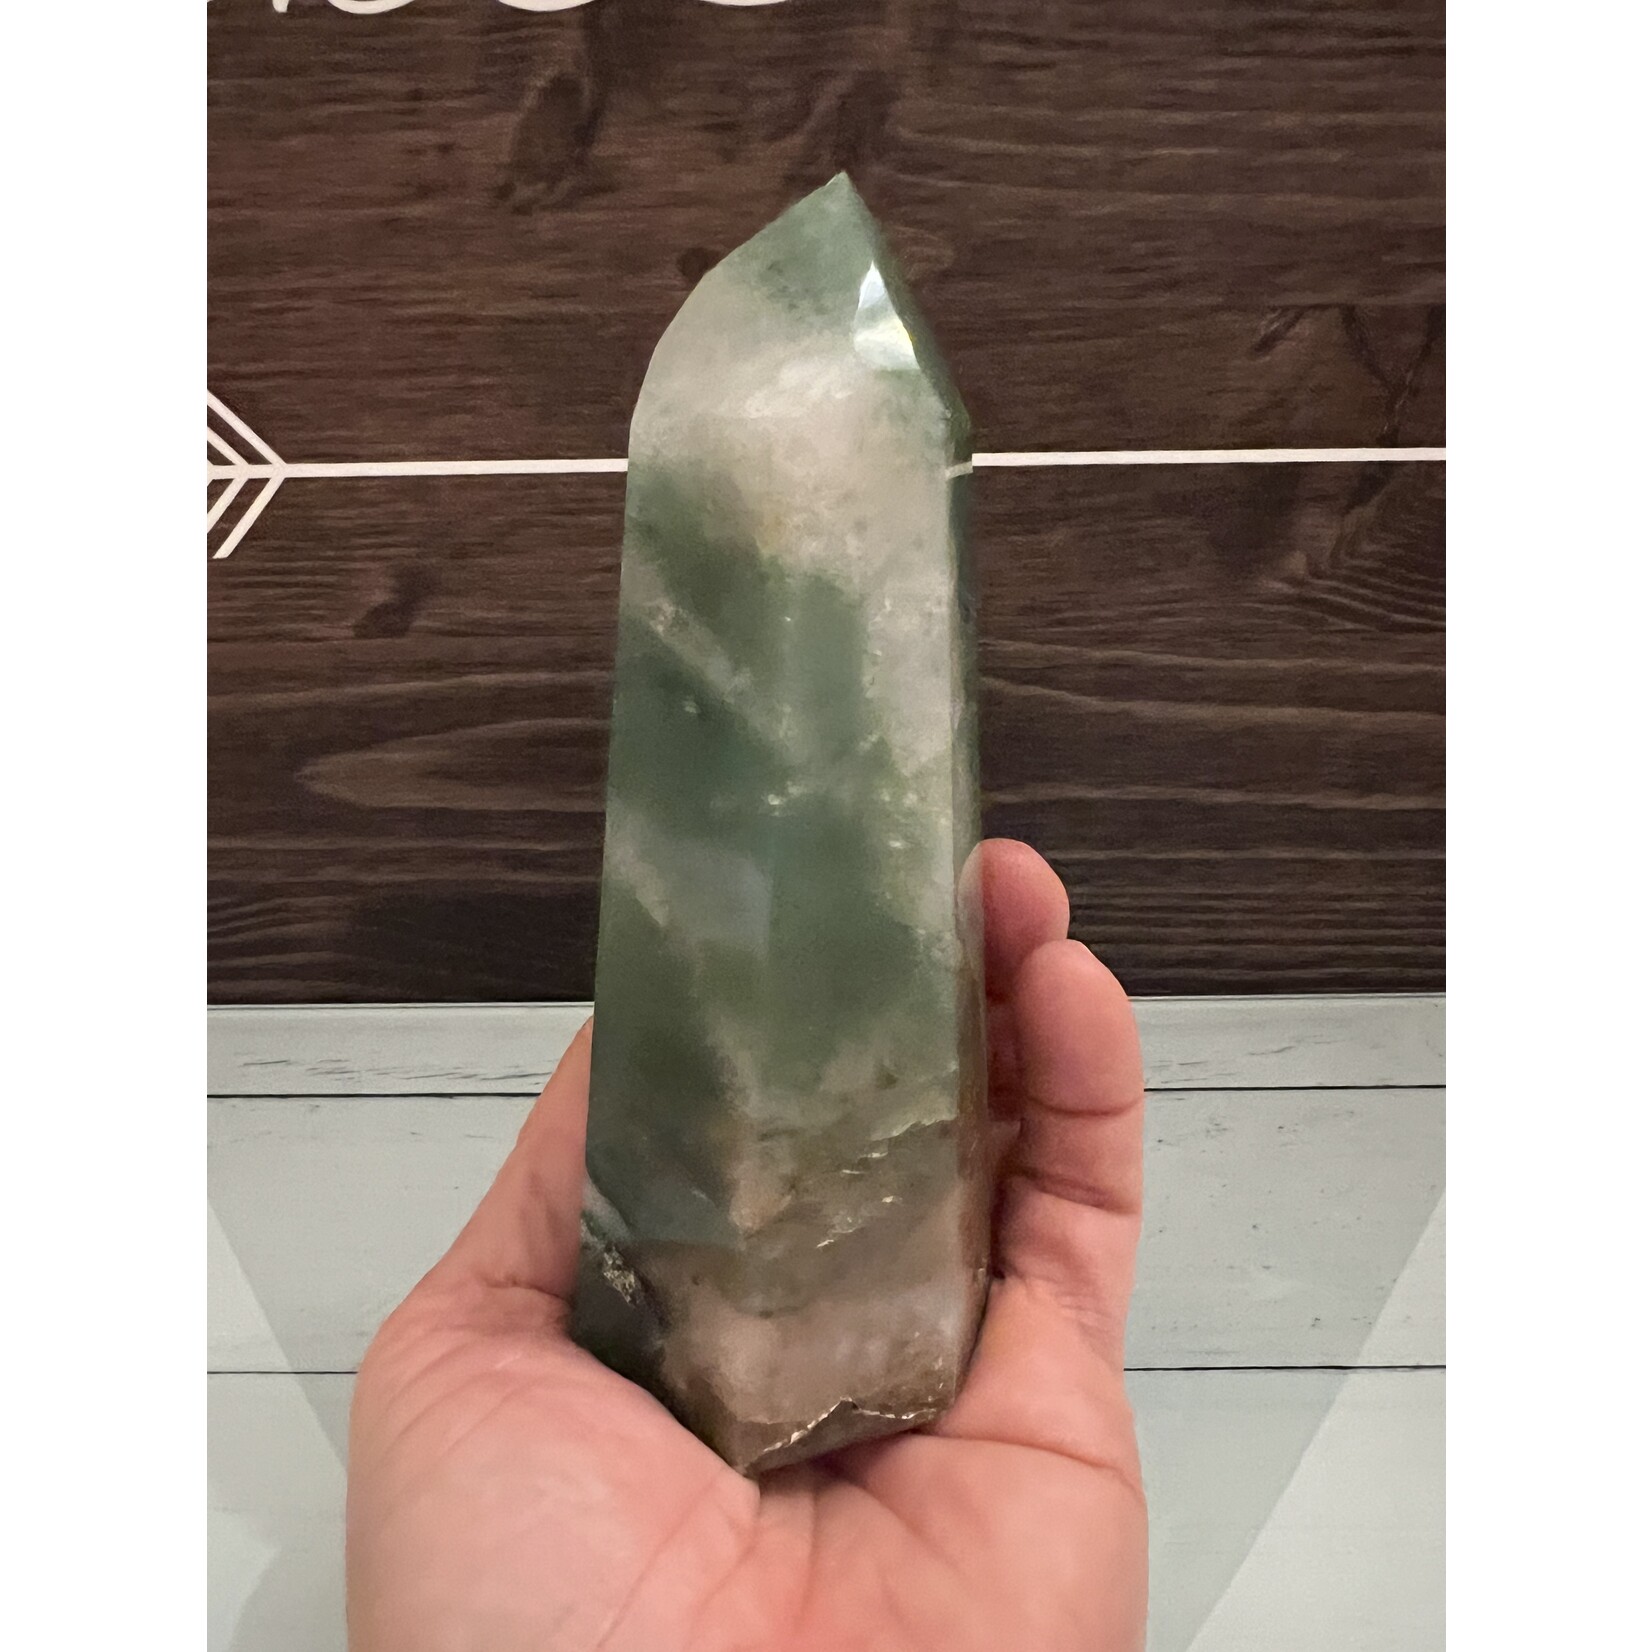 Exceptional Large Green Aventurine Point with Quartz: Amplify Masculine Energies While Harmonizing Mind and Heart